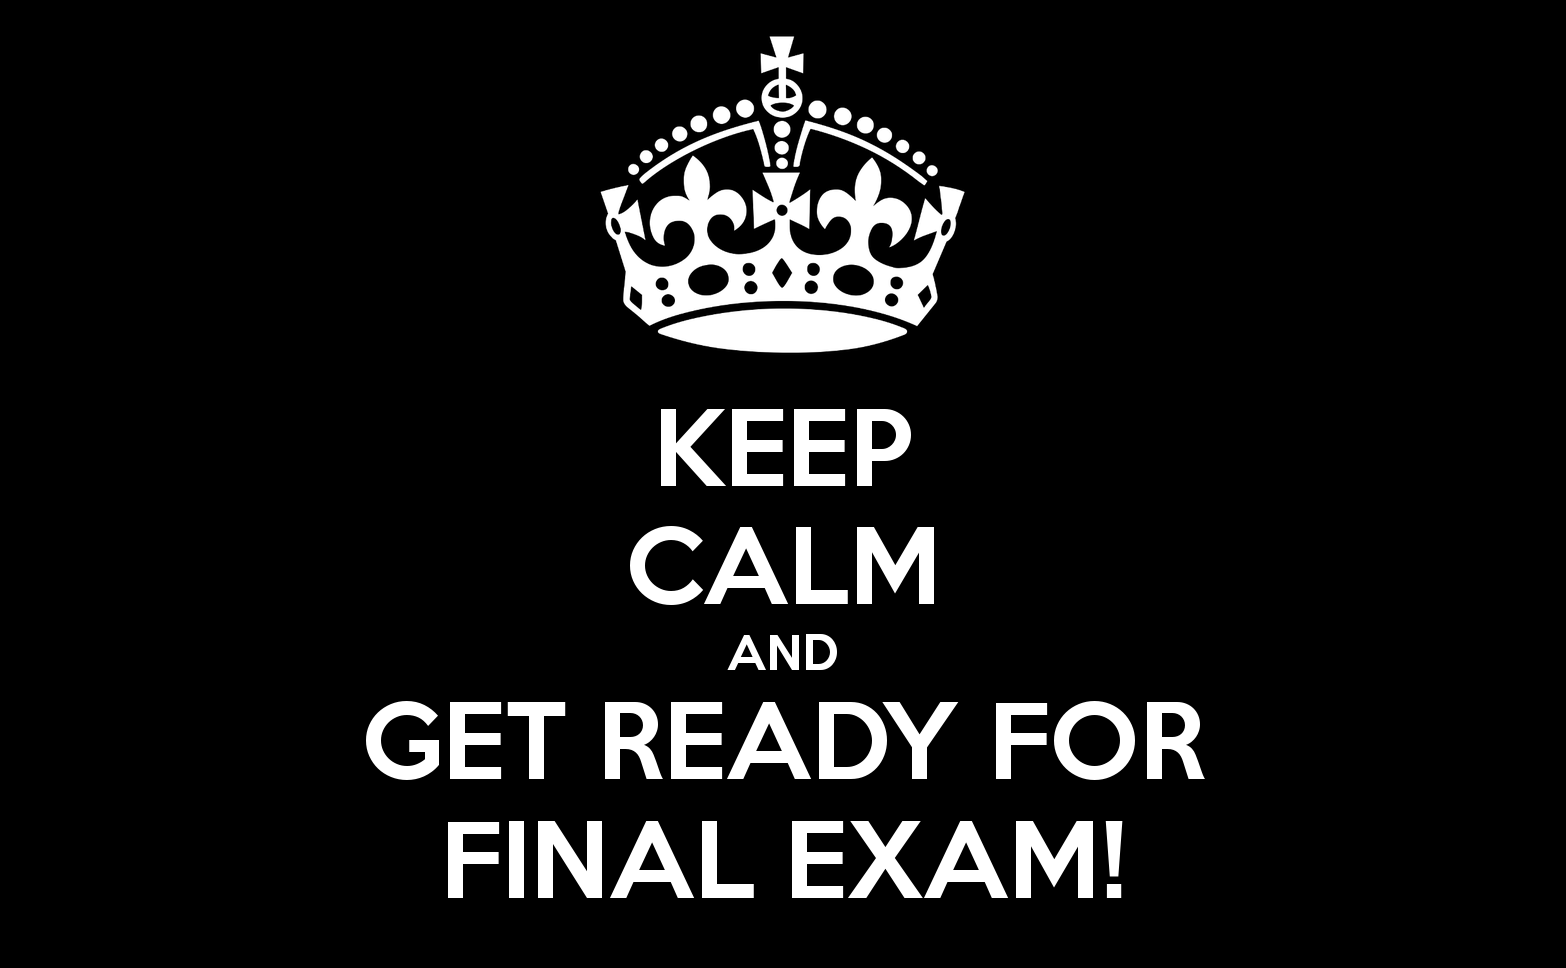 keep-calm-and-get-ready-for-final-exam-3.png